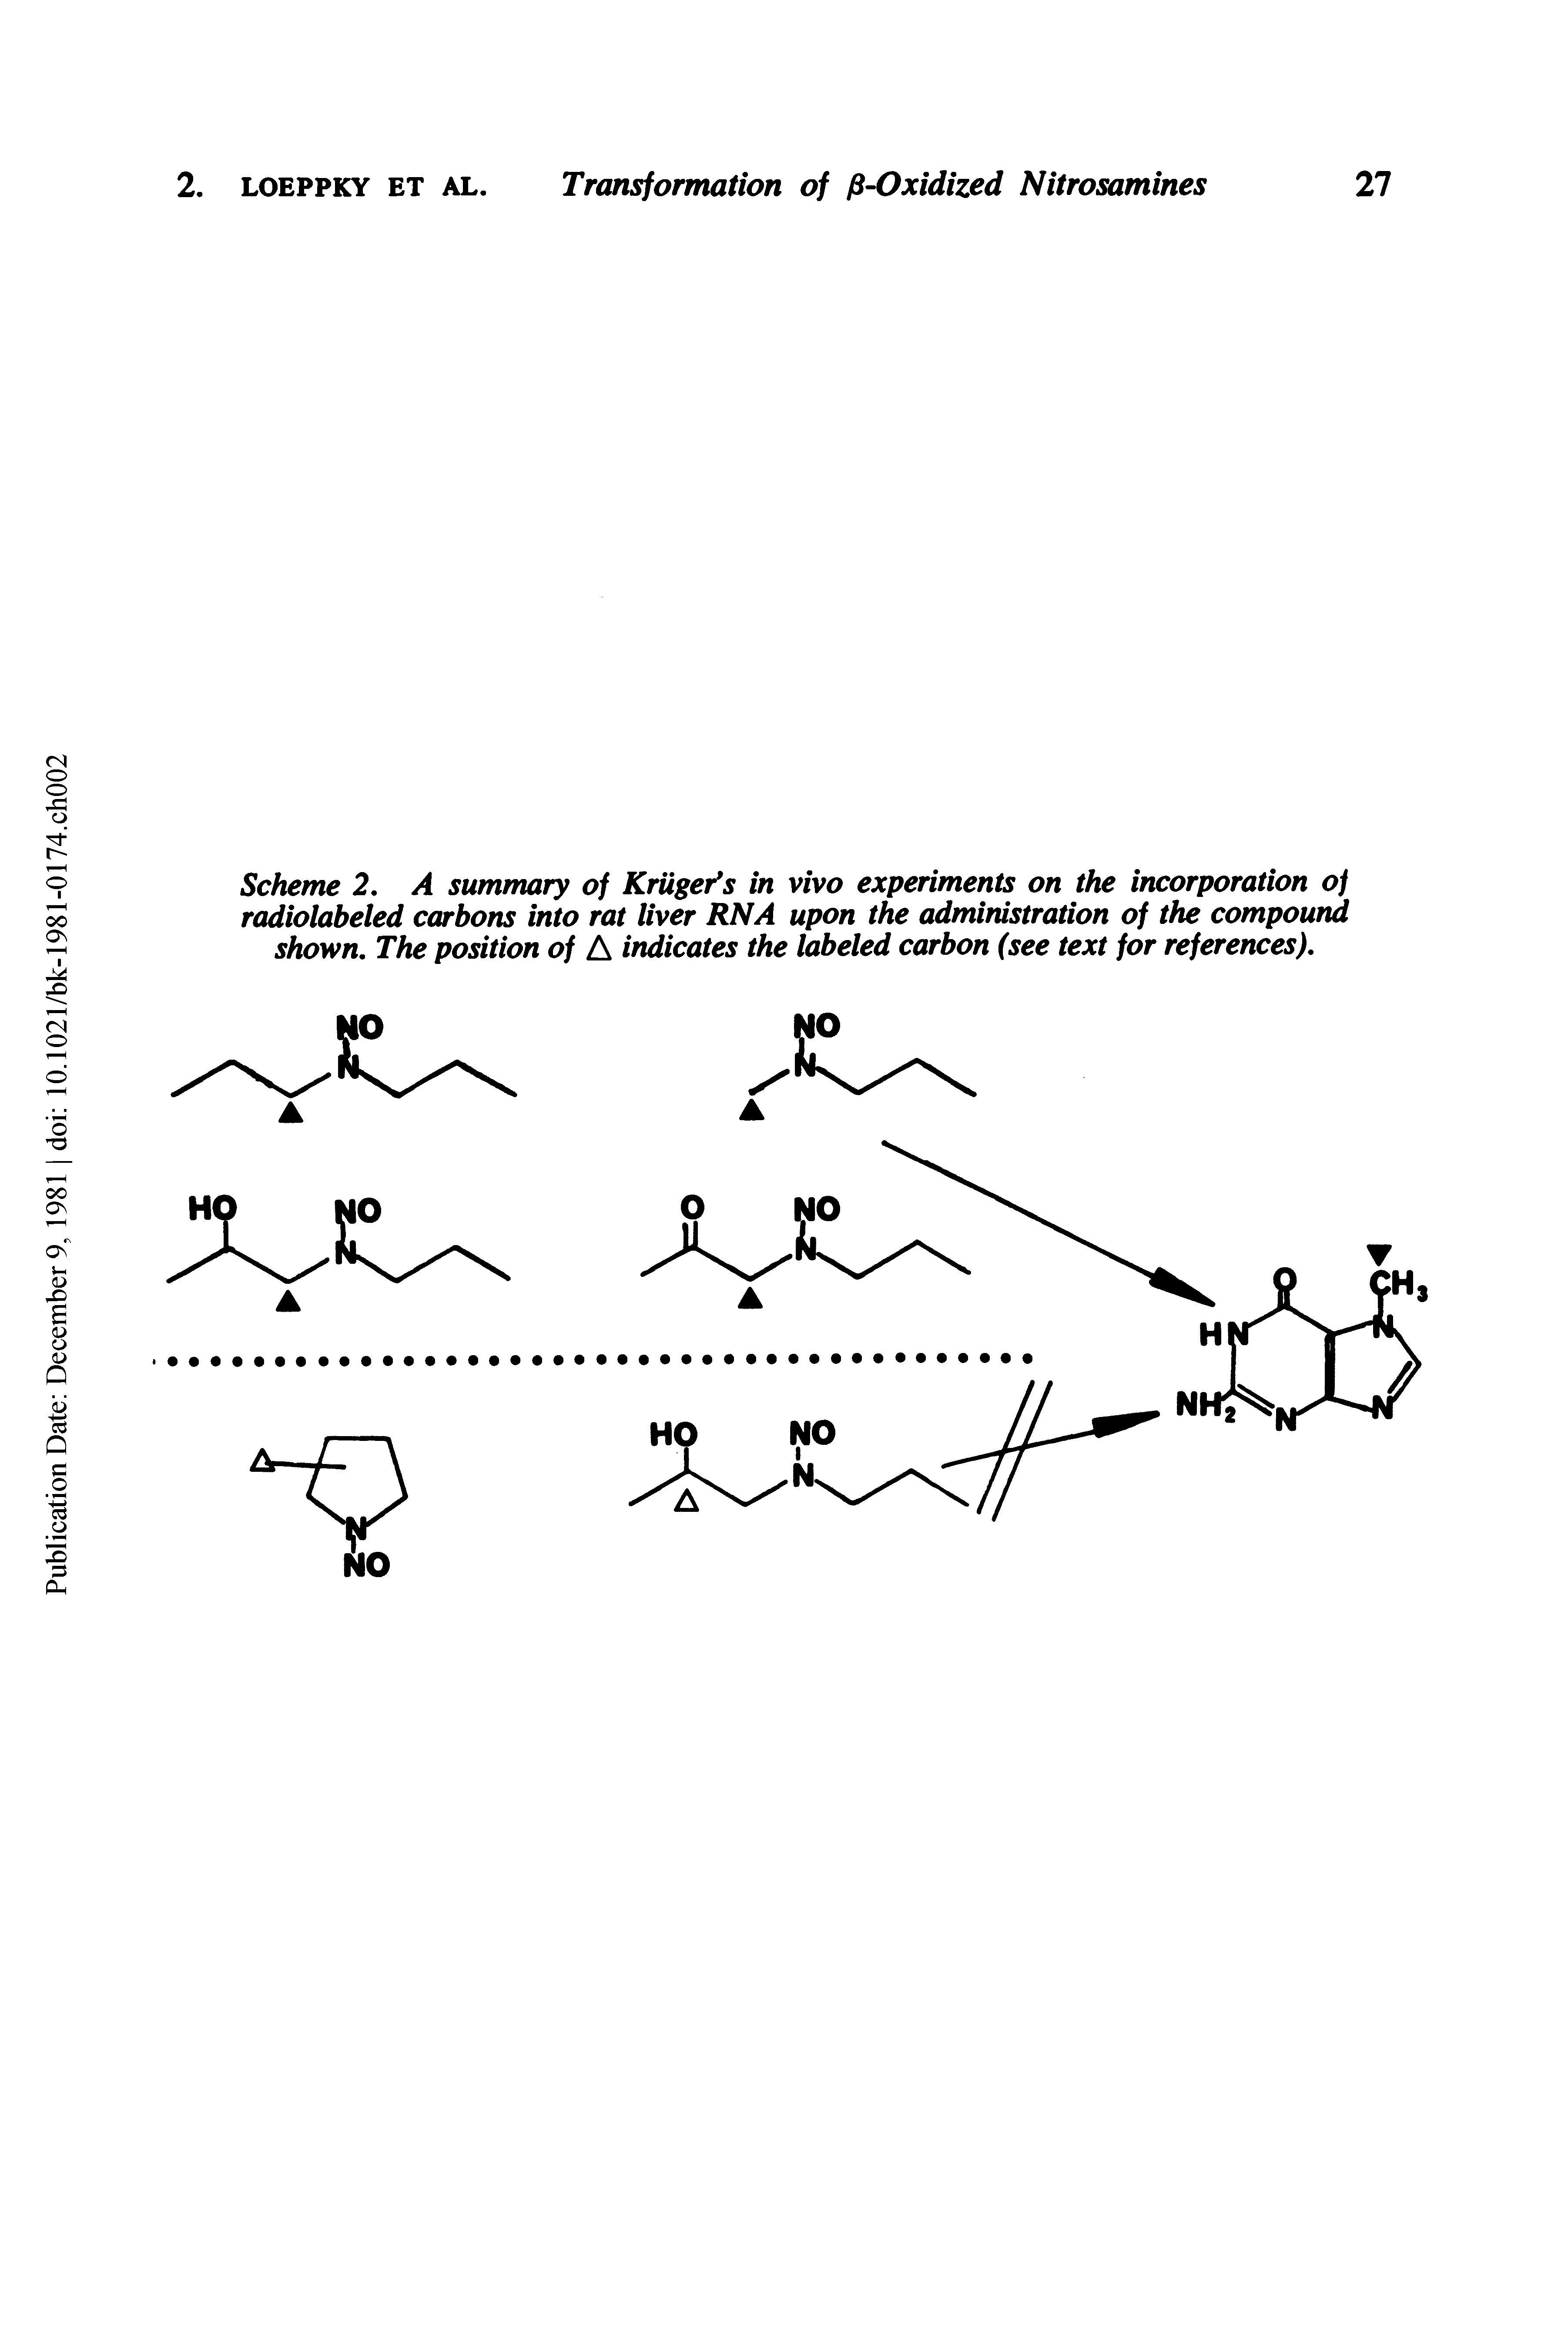 Scheme 2, A summary of Kriigefs in vivo experiments on the incorporation o] radiolabeled carbons into rat liver RNA upon the administration of the compound shown. The position of A indicates the labeled carbon (see text for references).